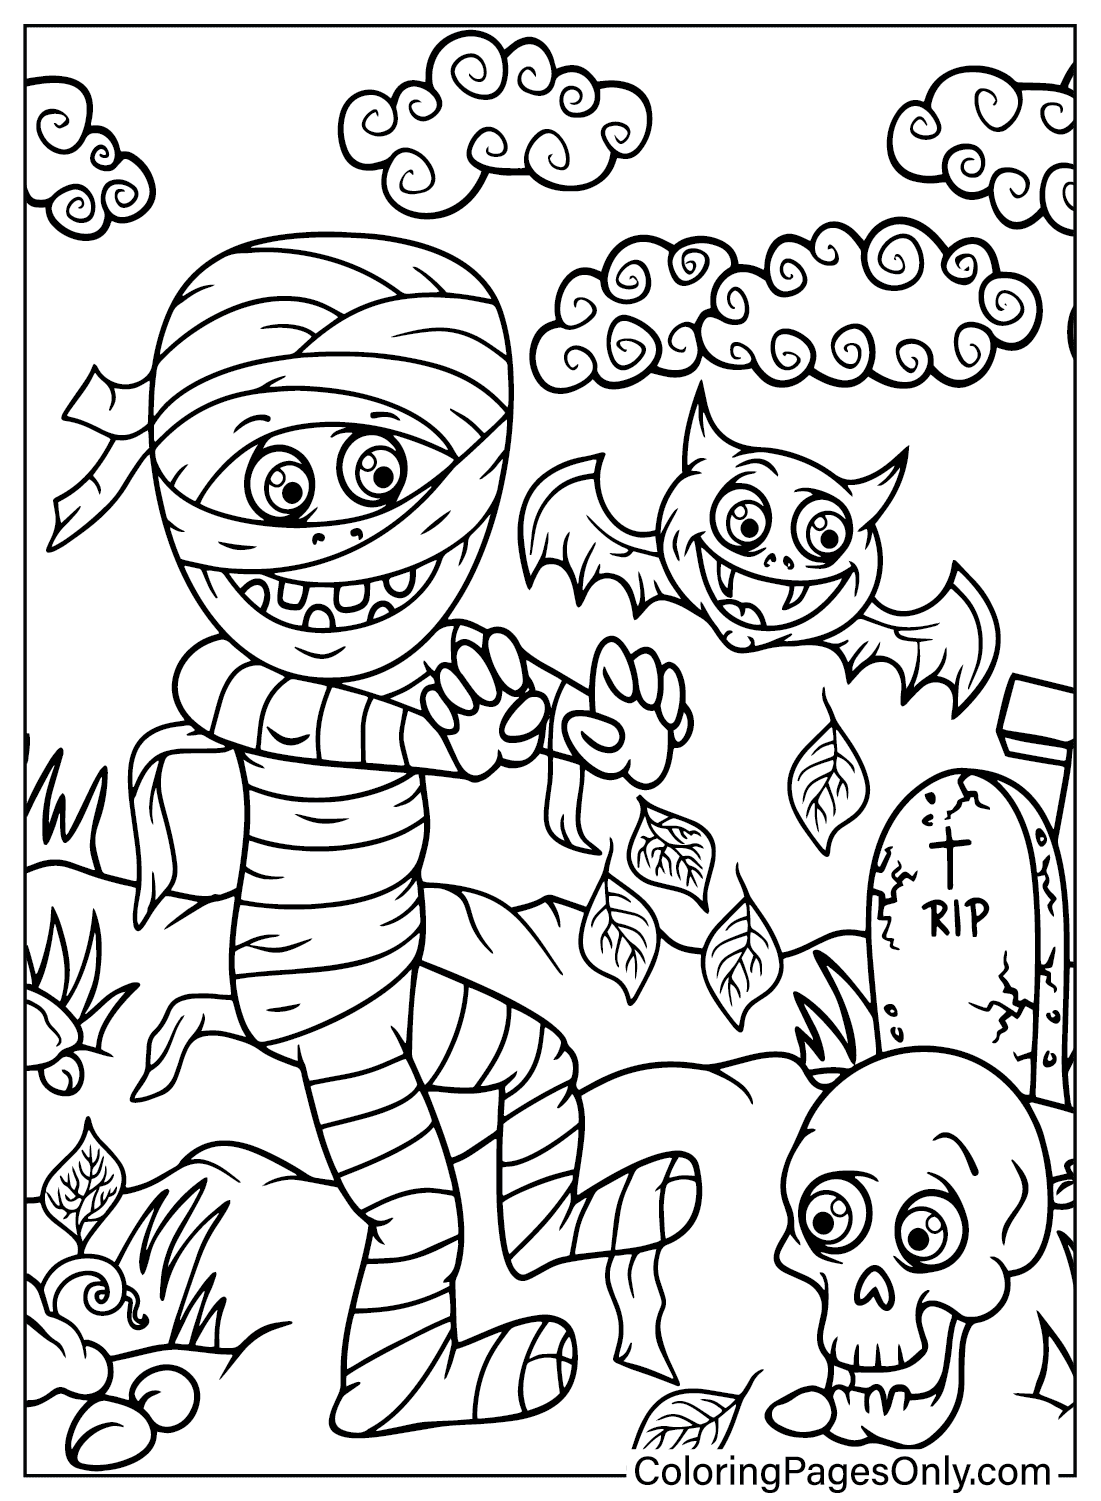 Mummy Coloring Page for Adults